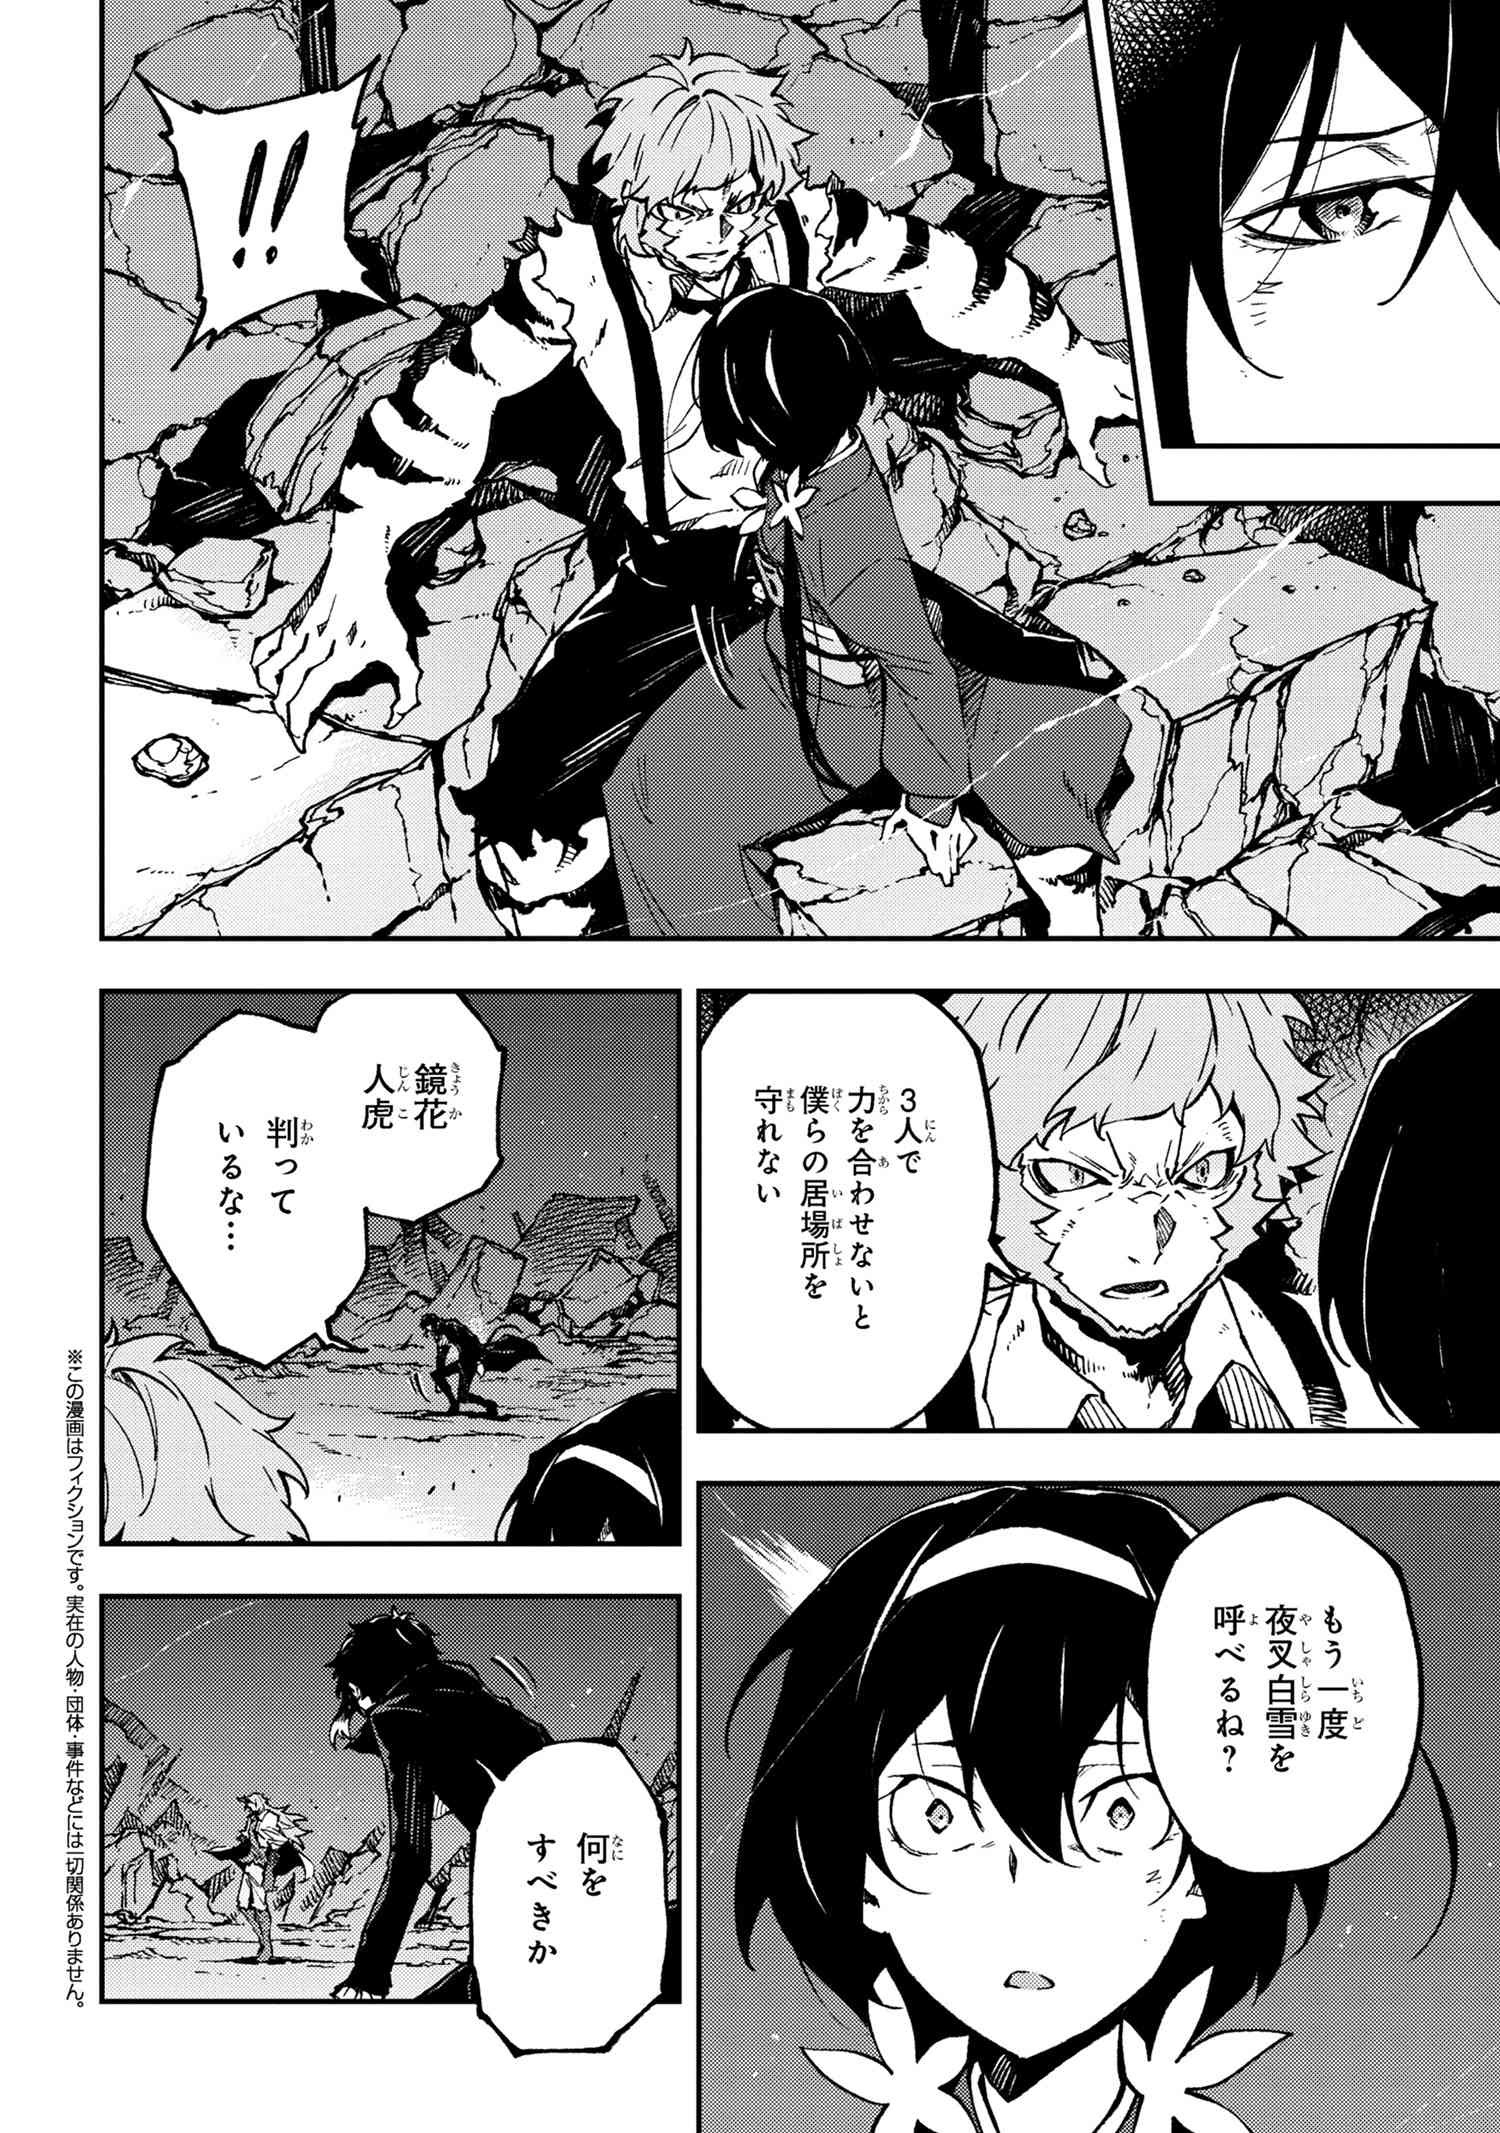 Bungou Stray Dogs: Dead Apple - Chapter 15-3 - Page 1